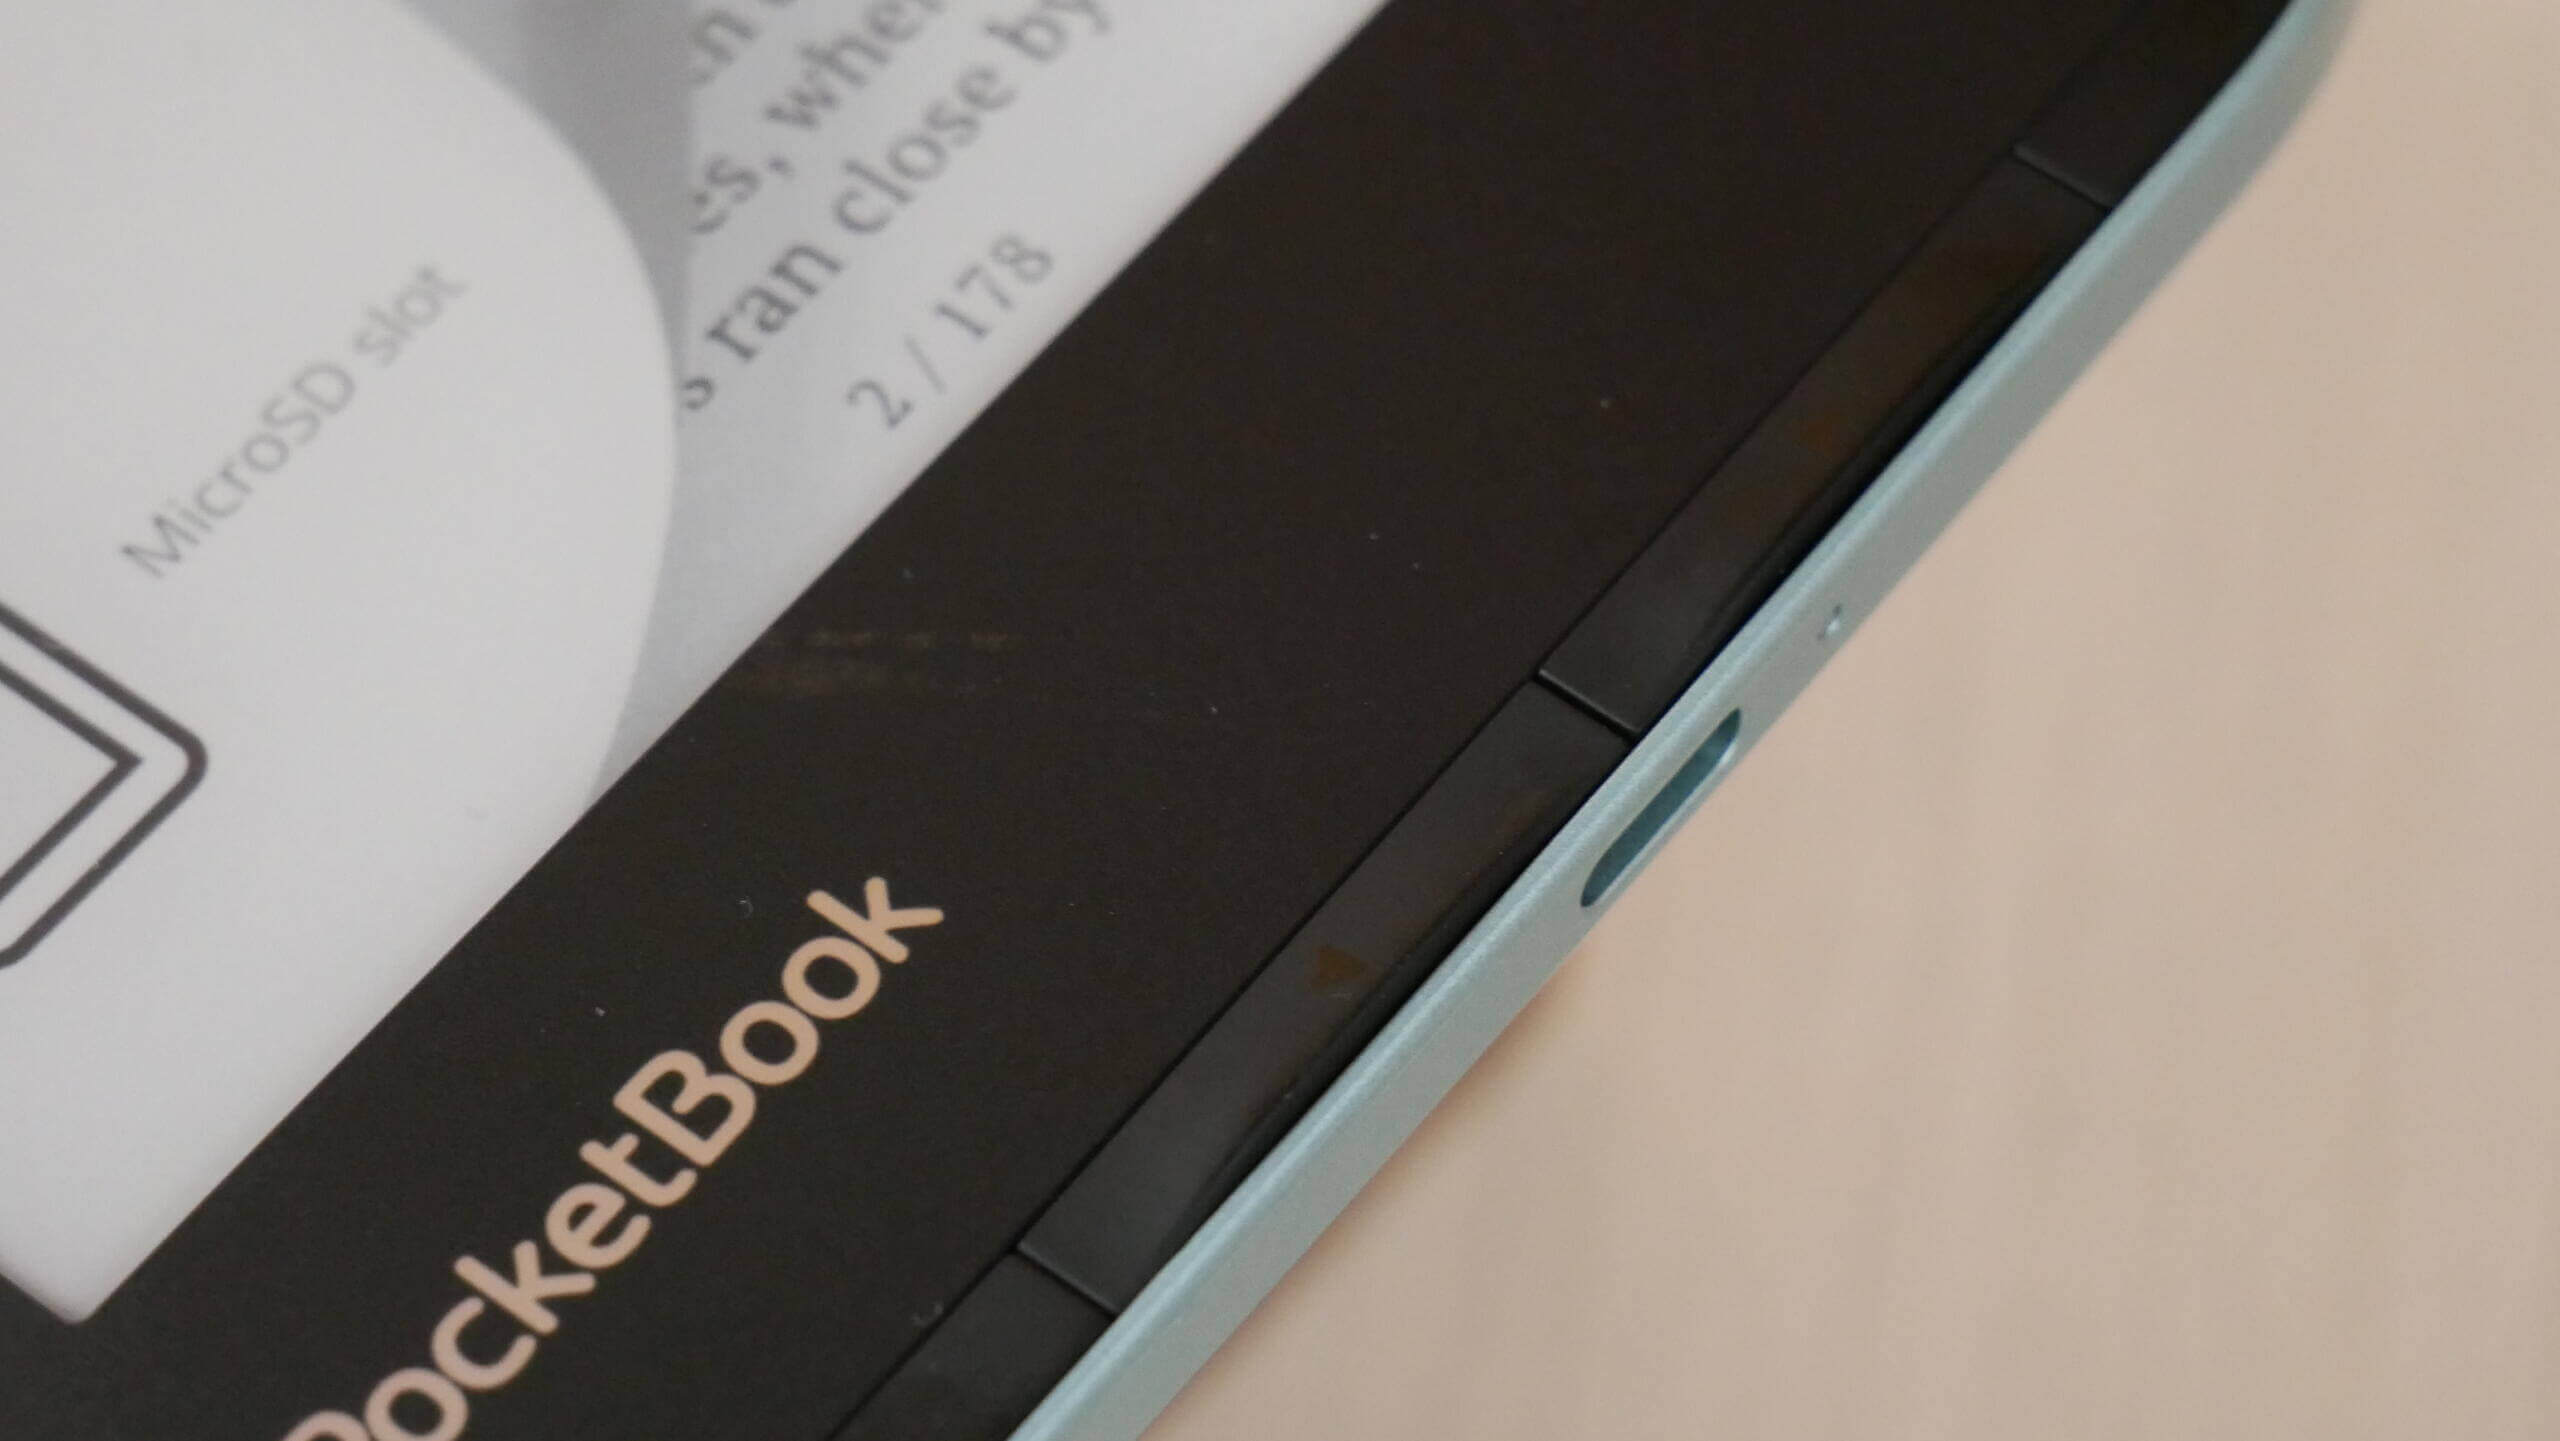 Pocketbook Verse Pro Review: a full-featured 6-inch e-reader